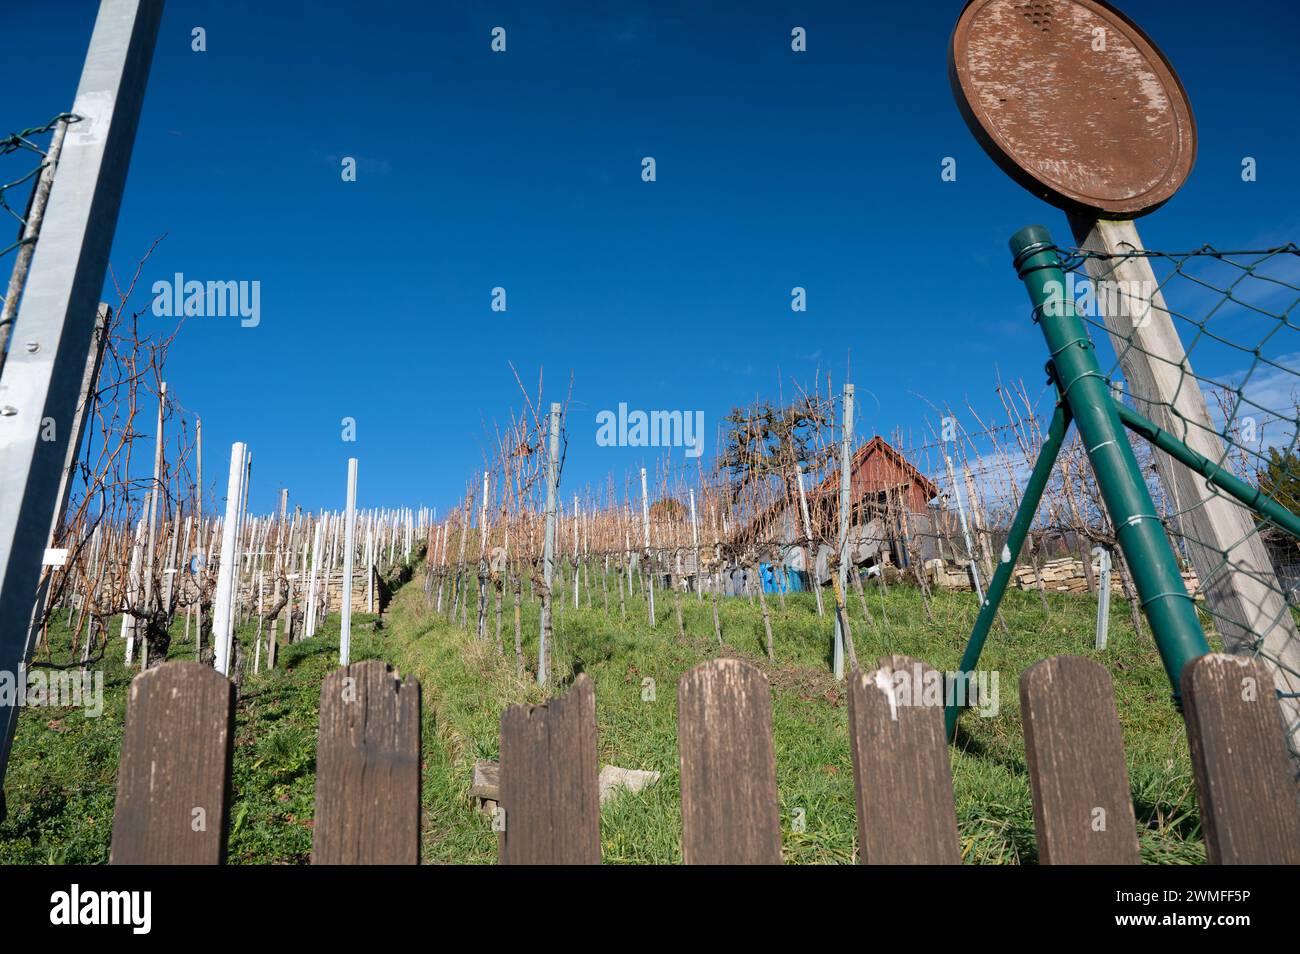 Vineyard in winter: Vines in rows, vineyard hut and old vineyard sign in the winter sun - view over the fence. Stock Photo